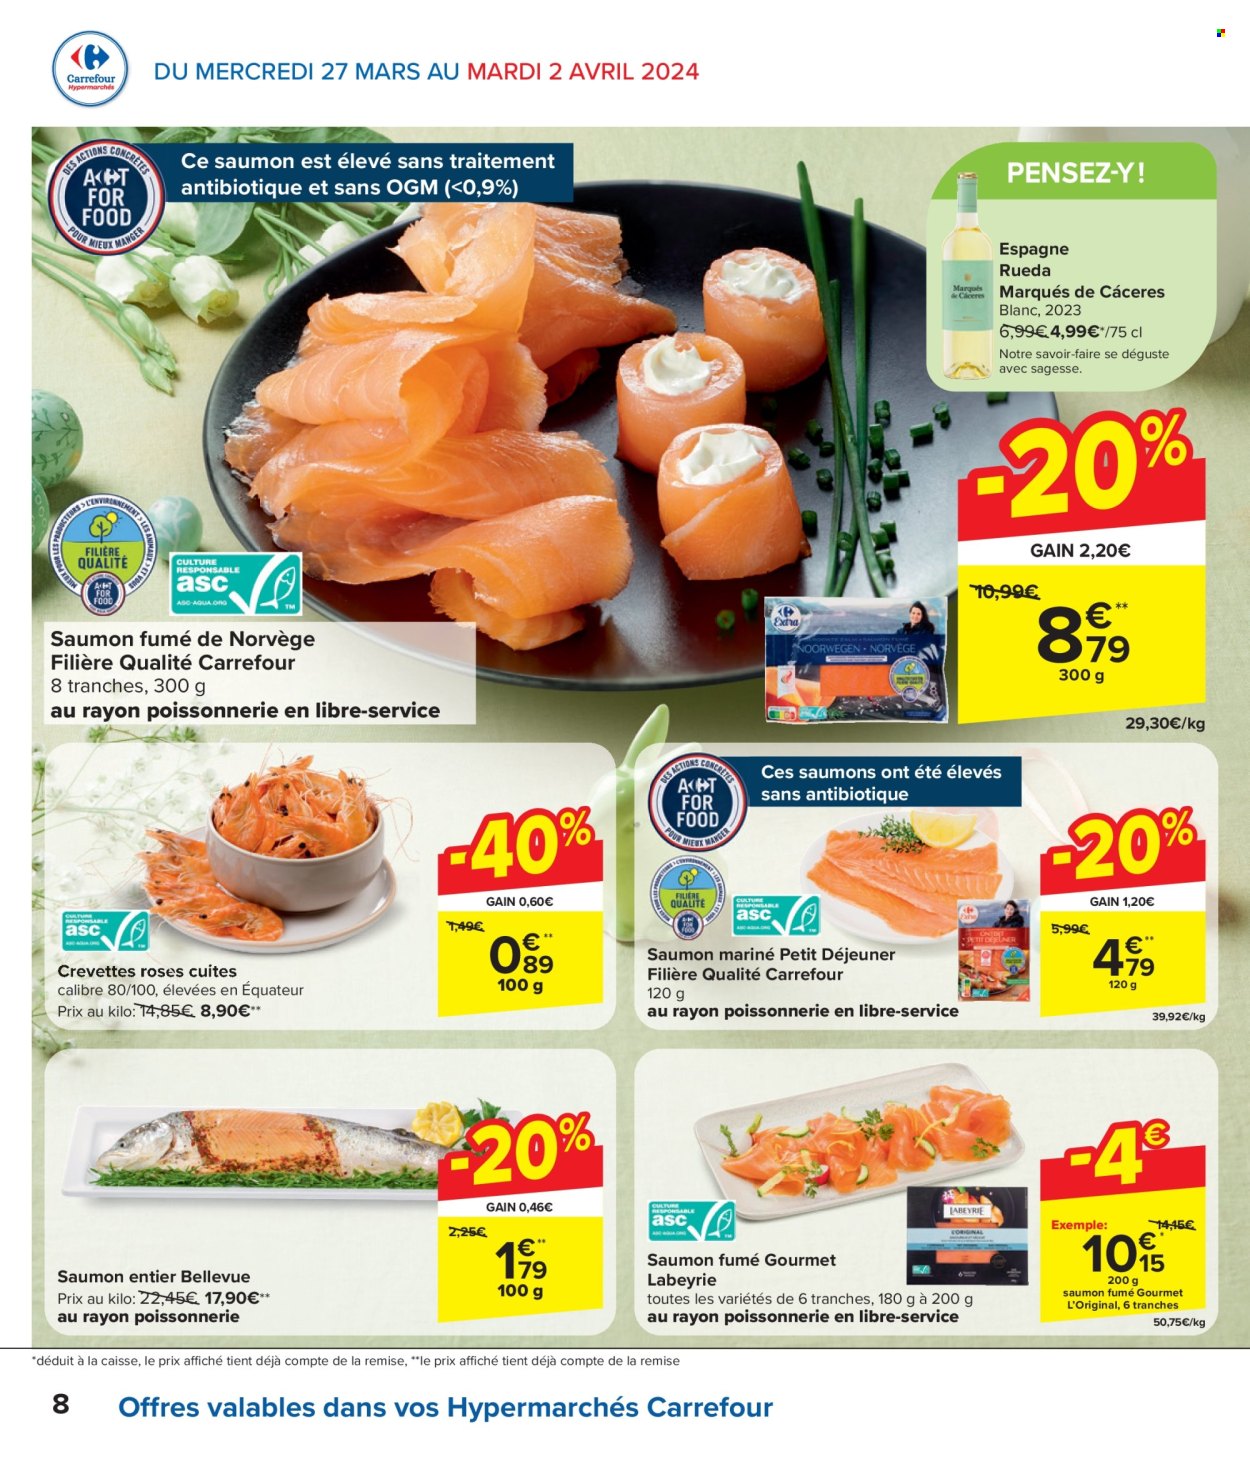 Catalogue Carrefour hypermarkt - 27.3.2024 - 8.4.2024. Page 8.